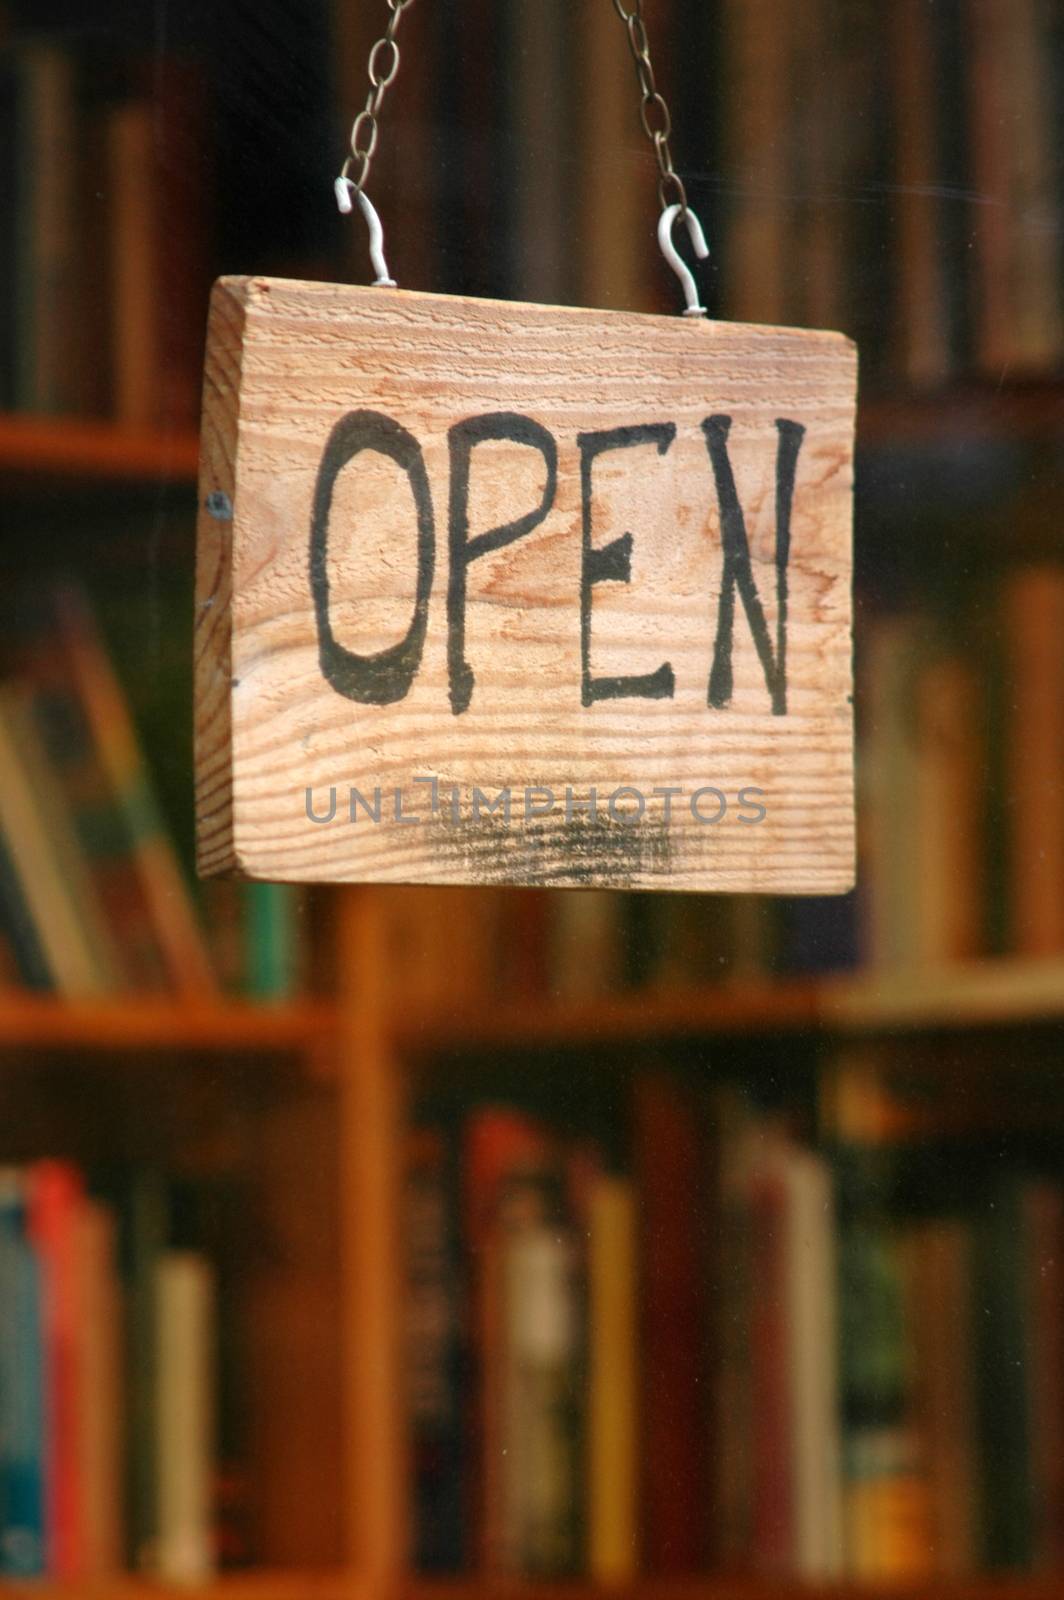 Retail and shopping image of an open sign in a book shop window